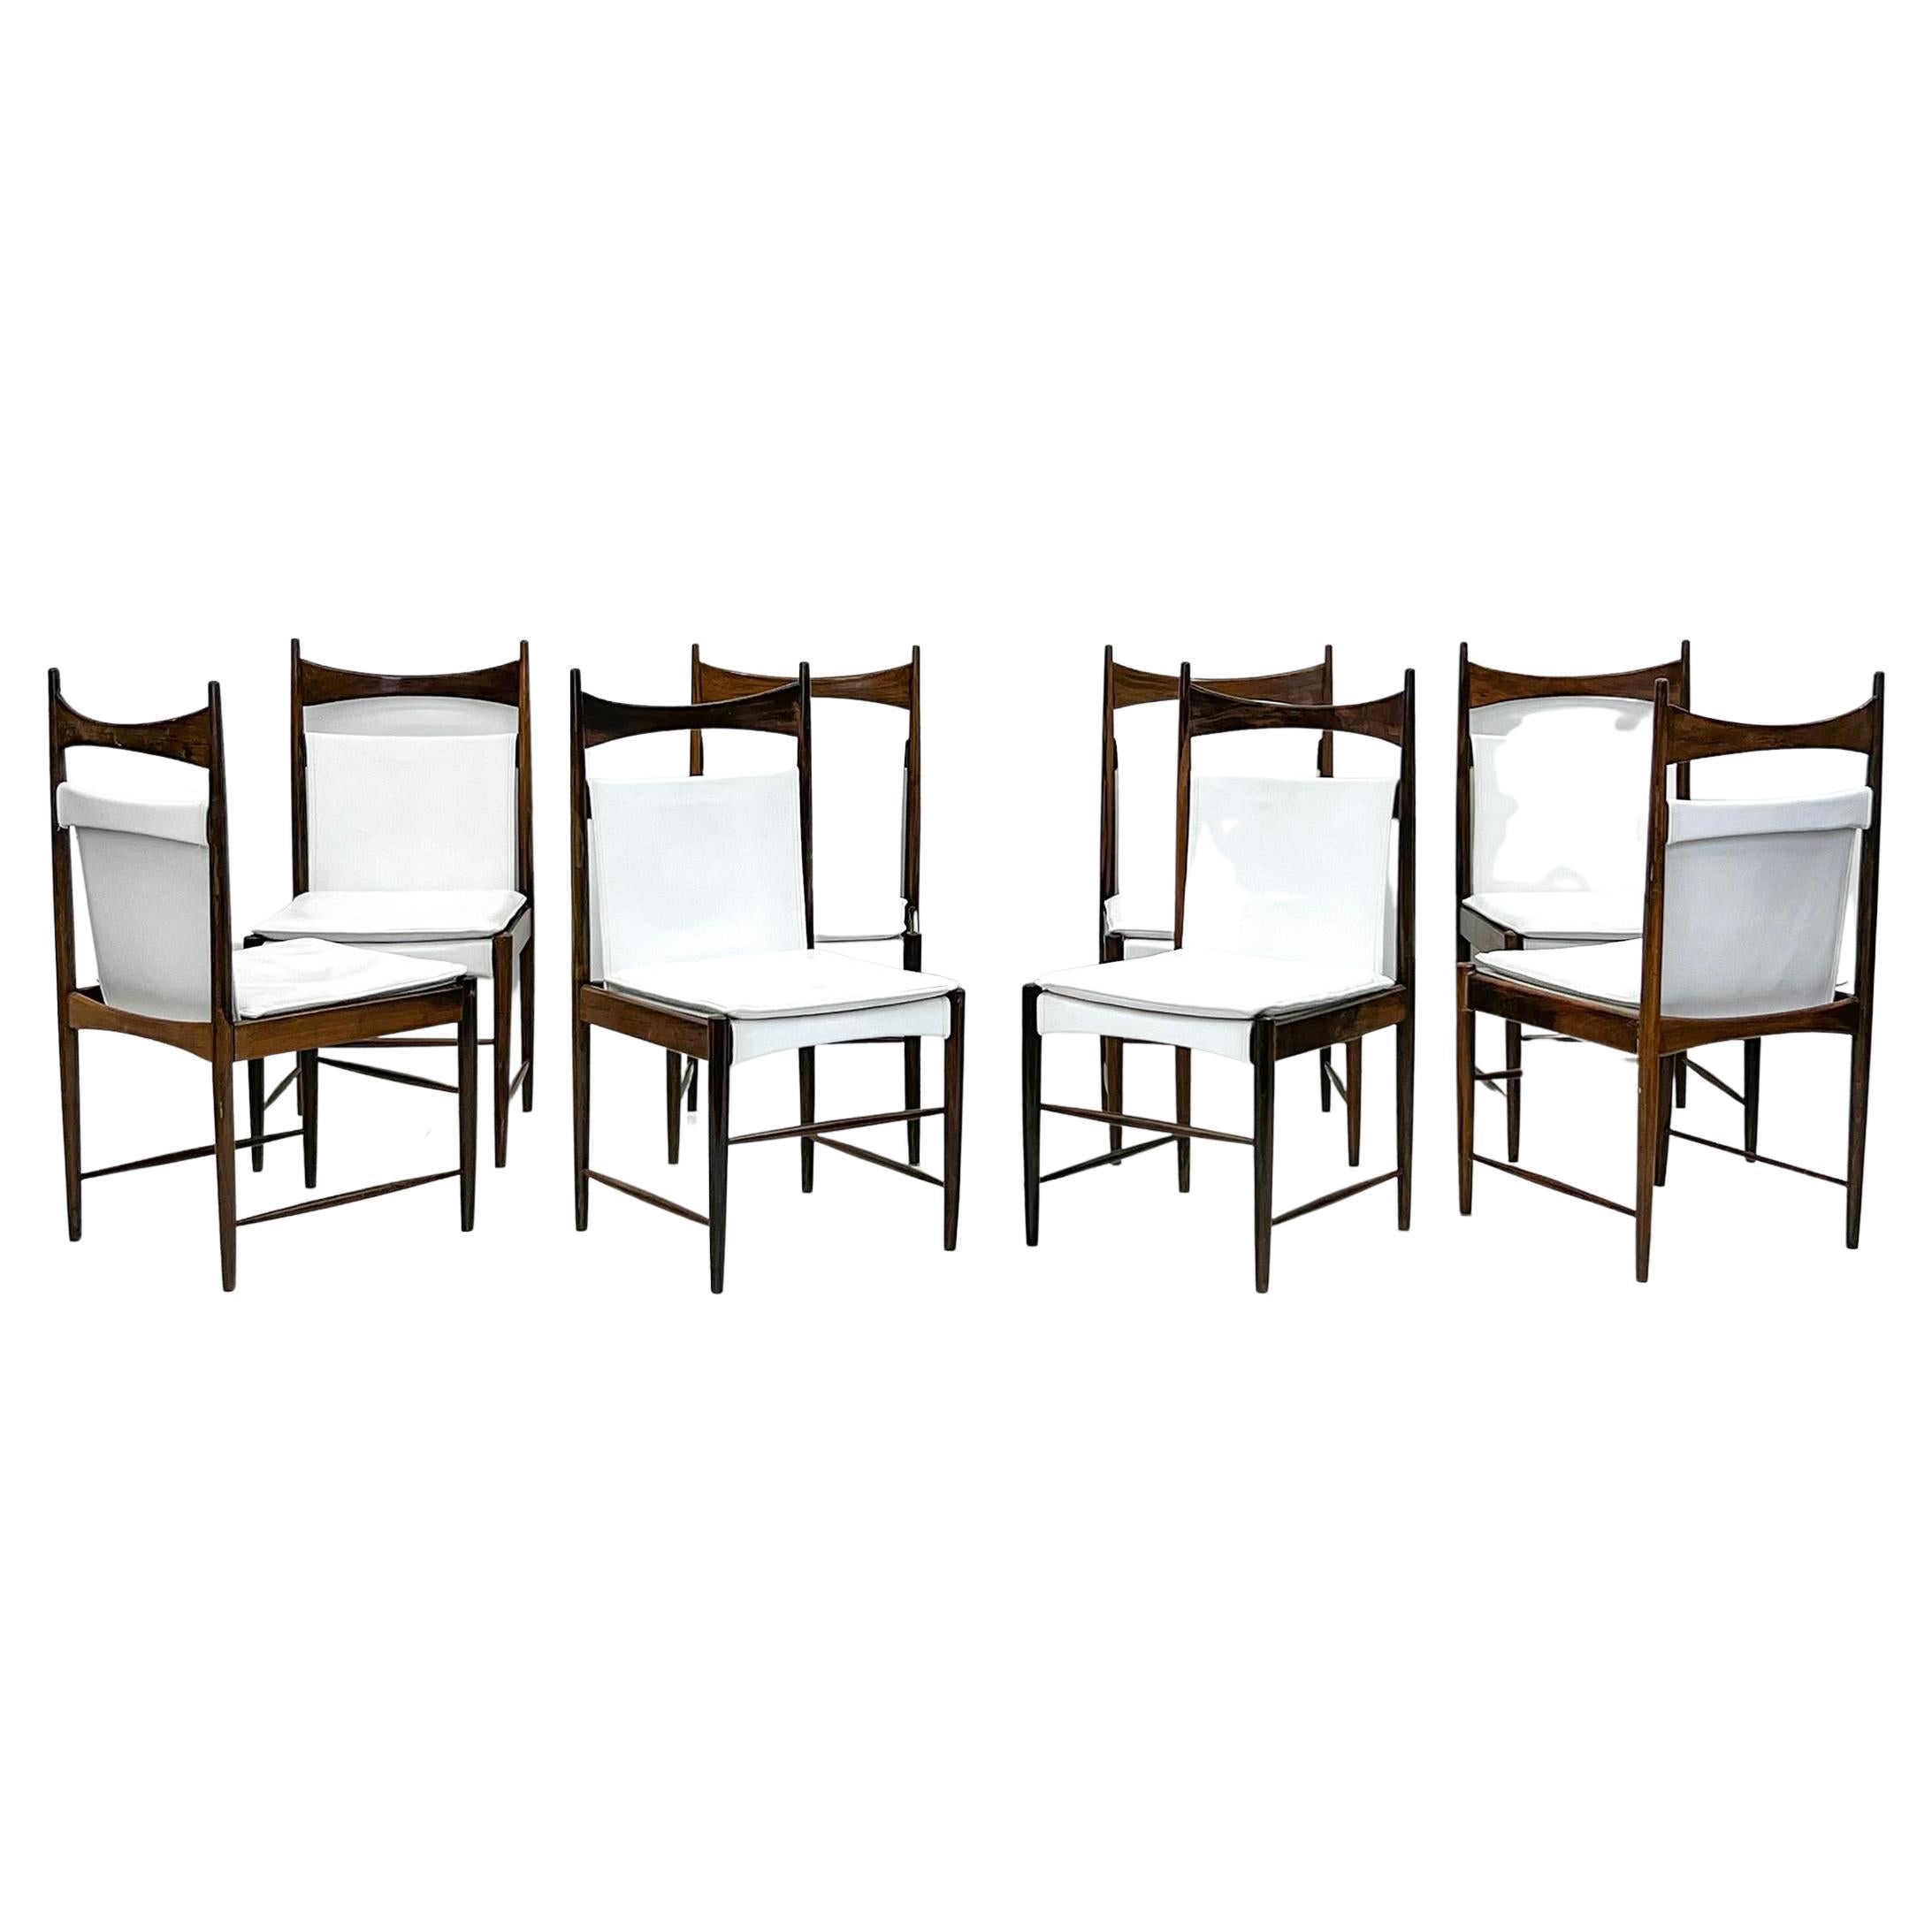 Set of 8 Rosewood Cantu Dining Chairs, Sergio Rodrigues, OCA Brazil, 1950's